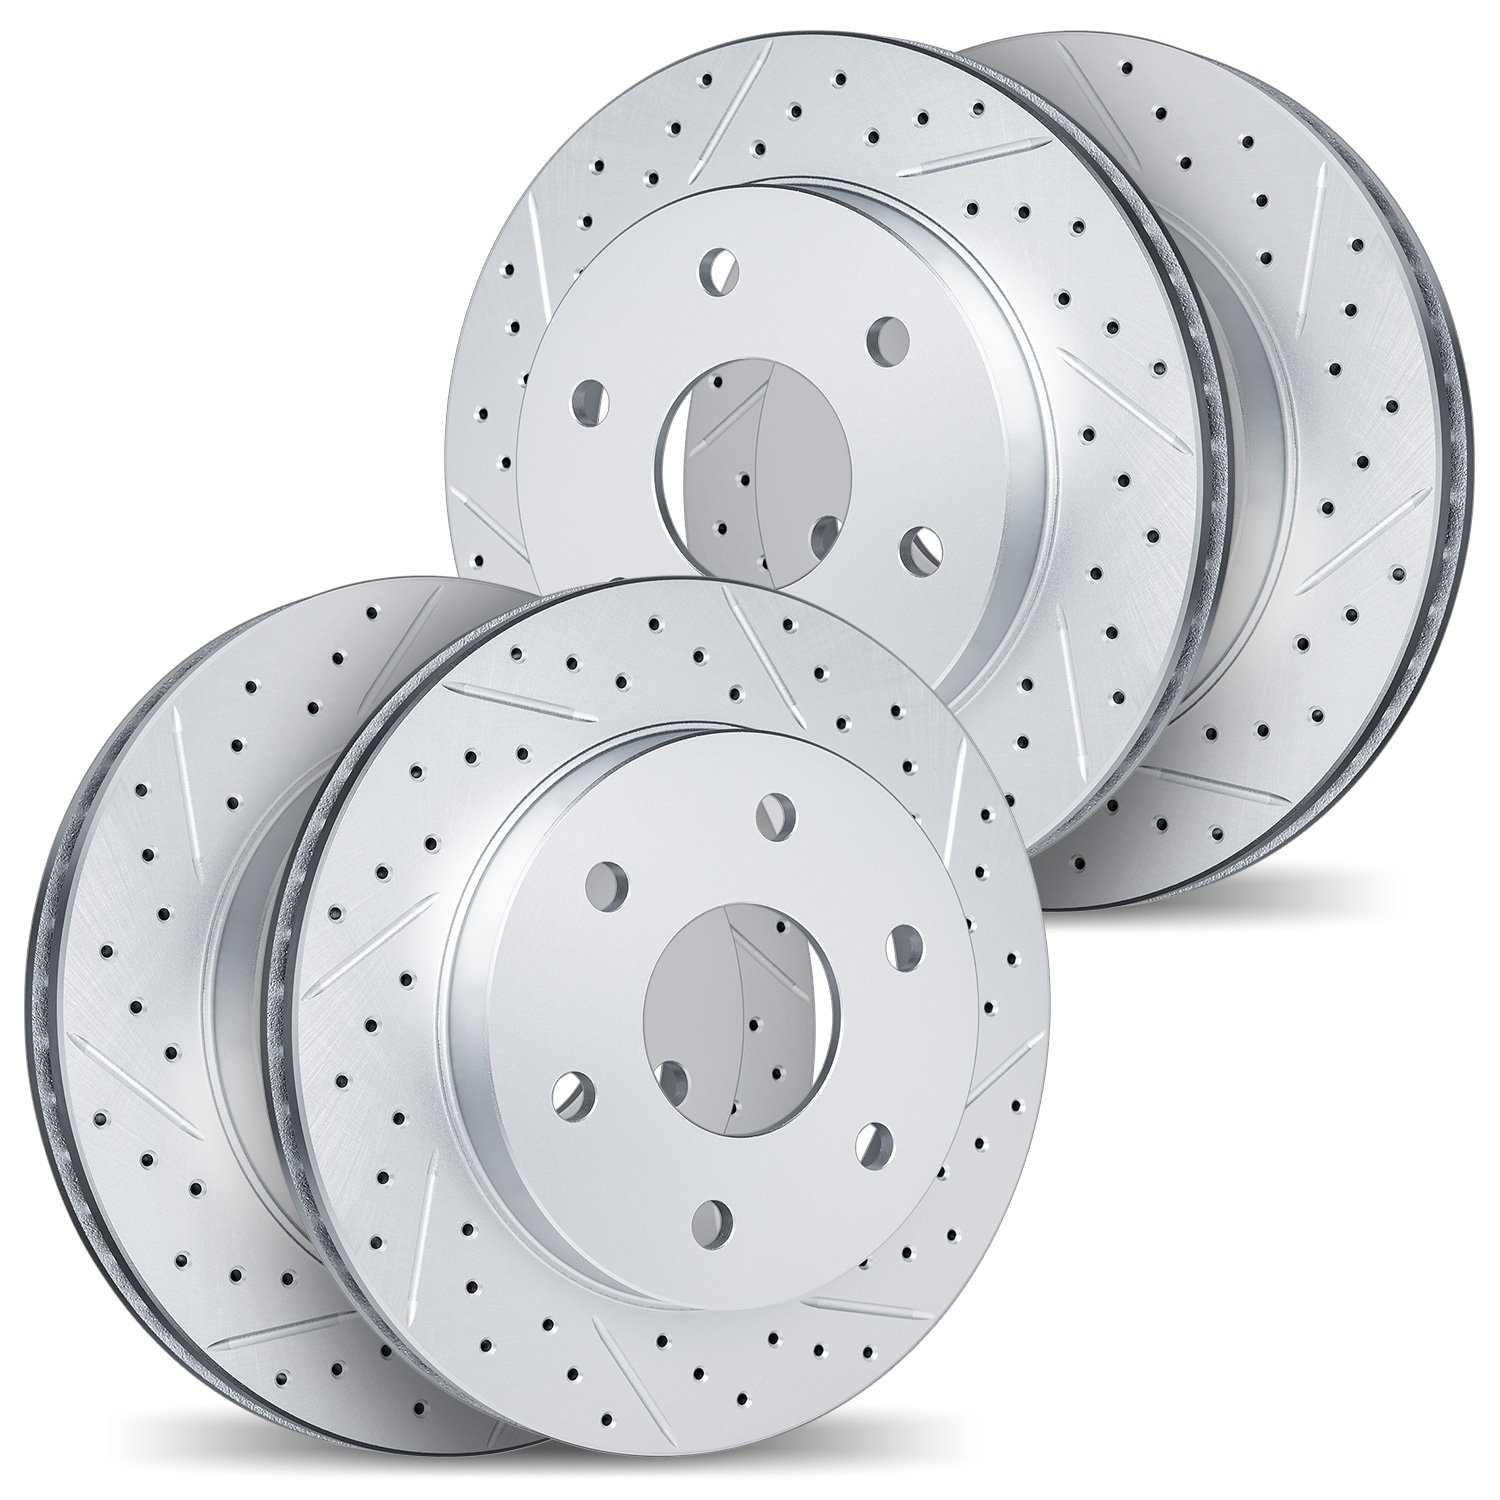 2004-54175 Geoperformance Drilled/Slotted Brake Rotors, Fits Select Ford/Lincoln/Mercury/Mazda, Position: Front and Rear